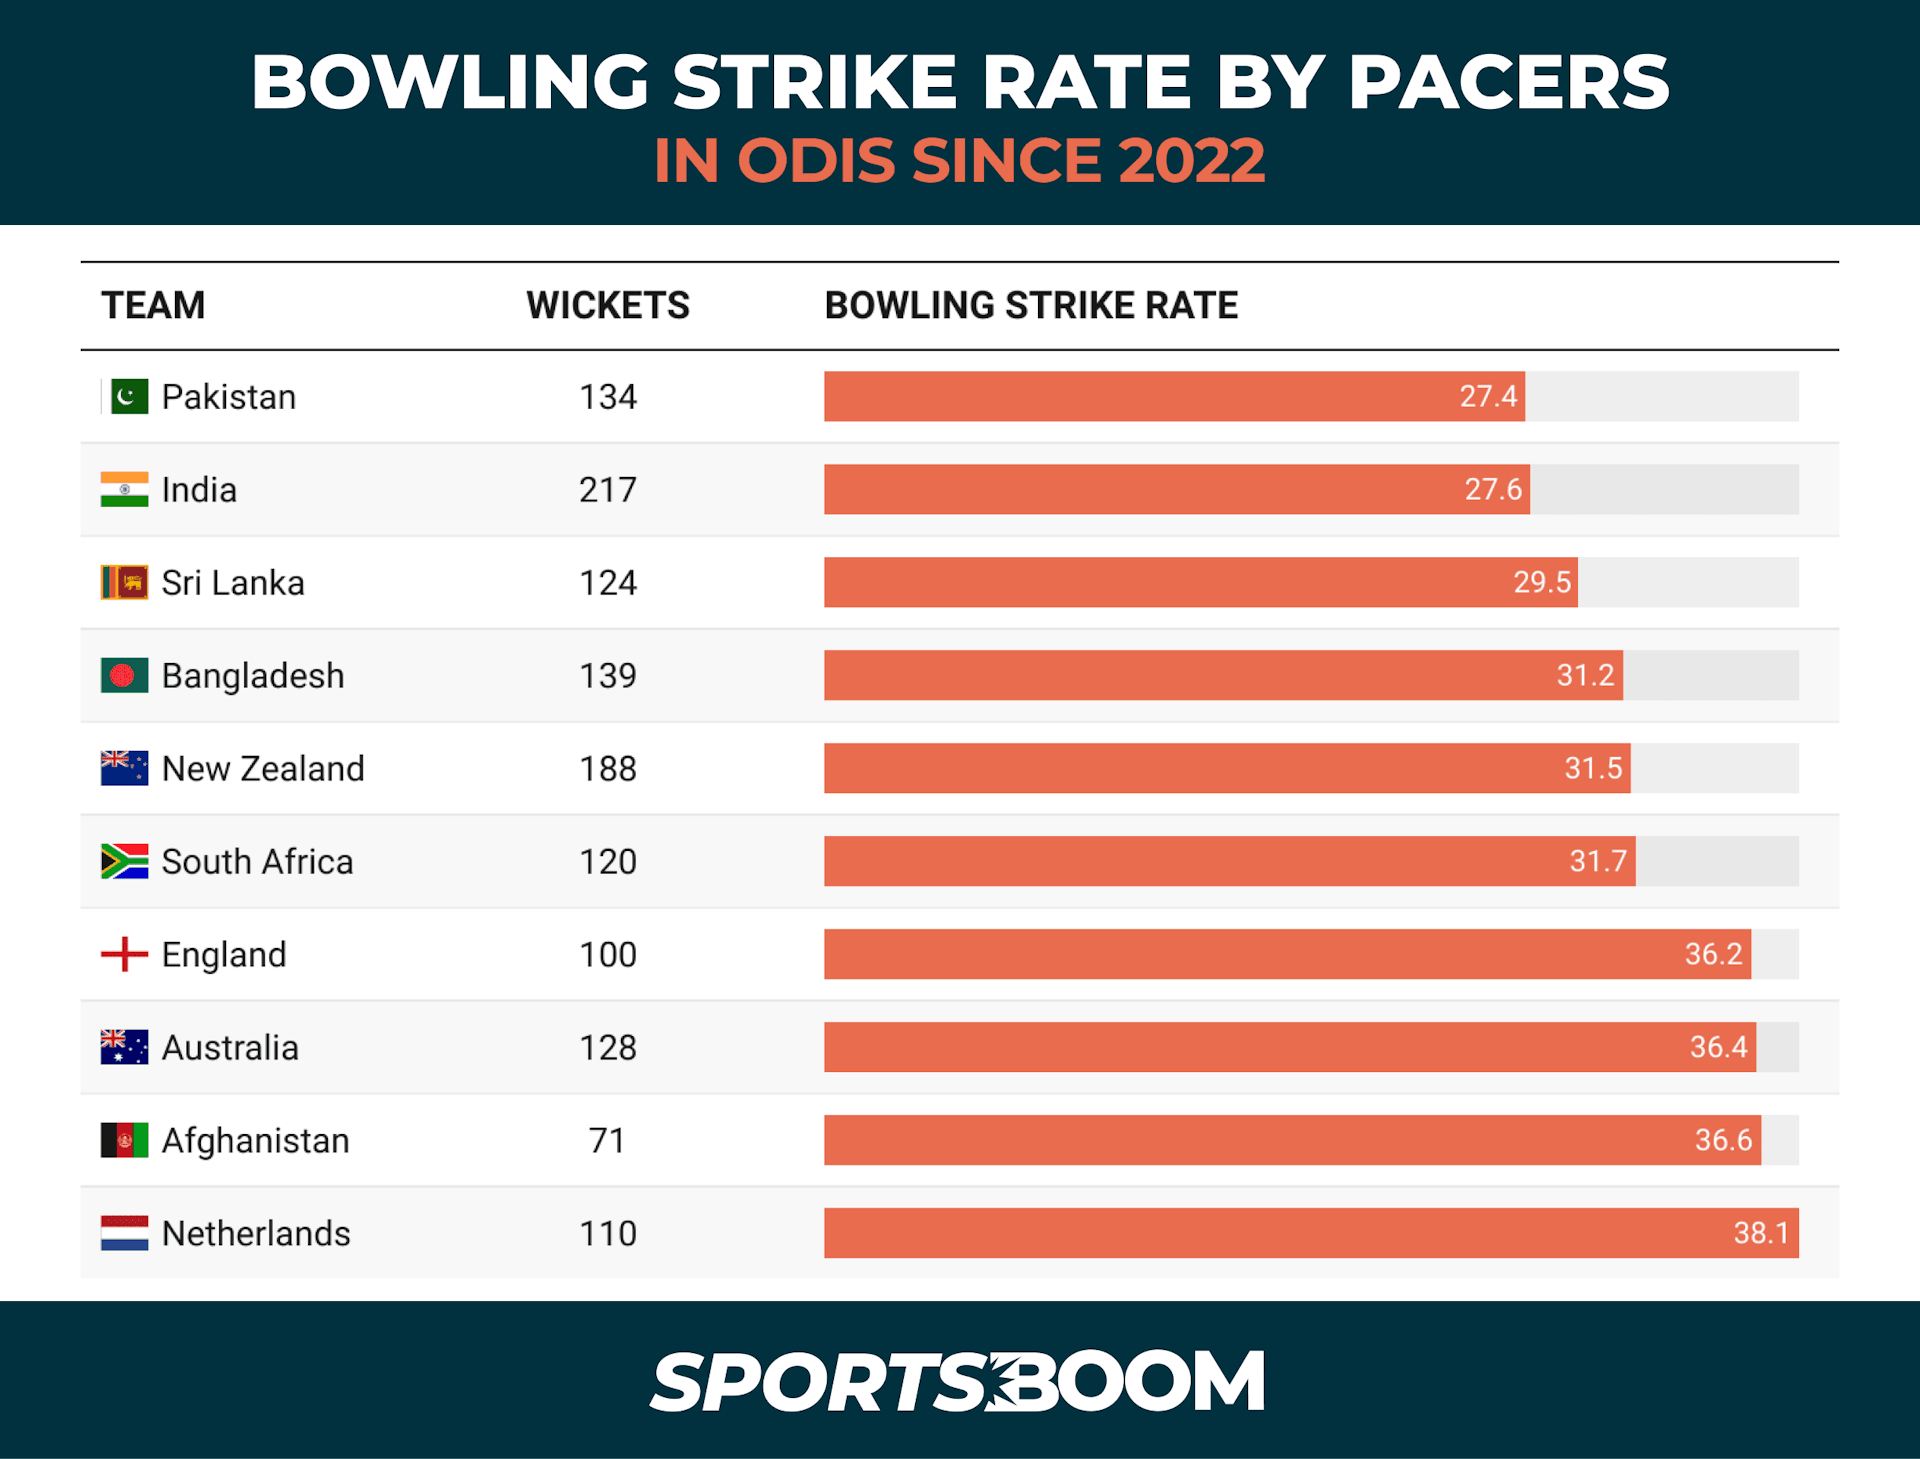 BOWLING STRIKE RATE BY PACERS IN ODIS SINCE 2022.png